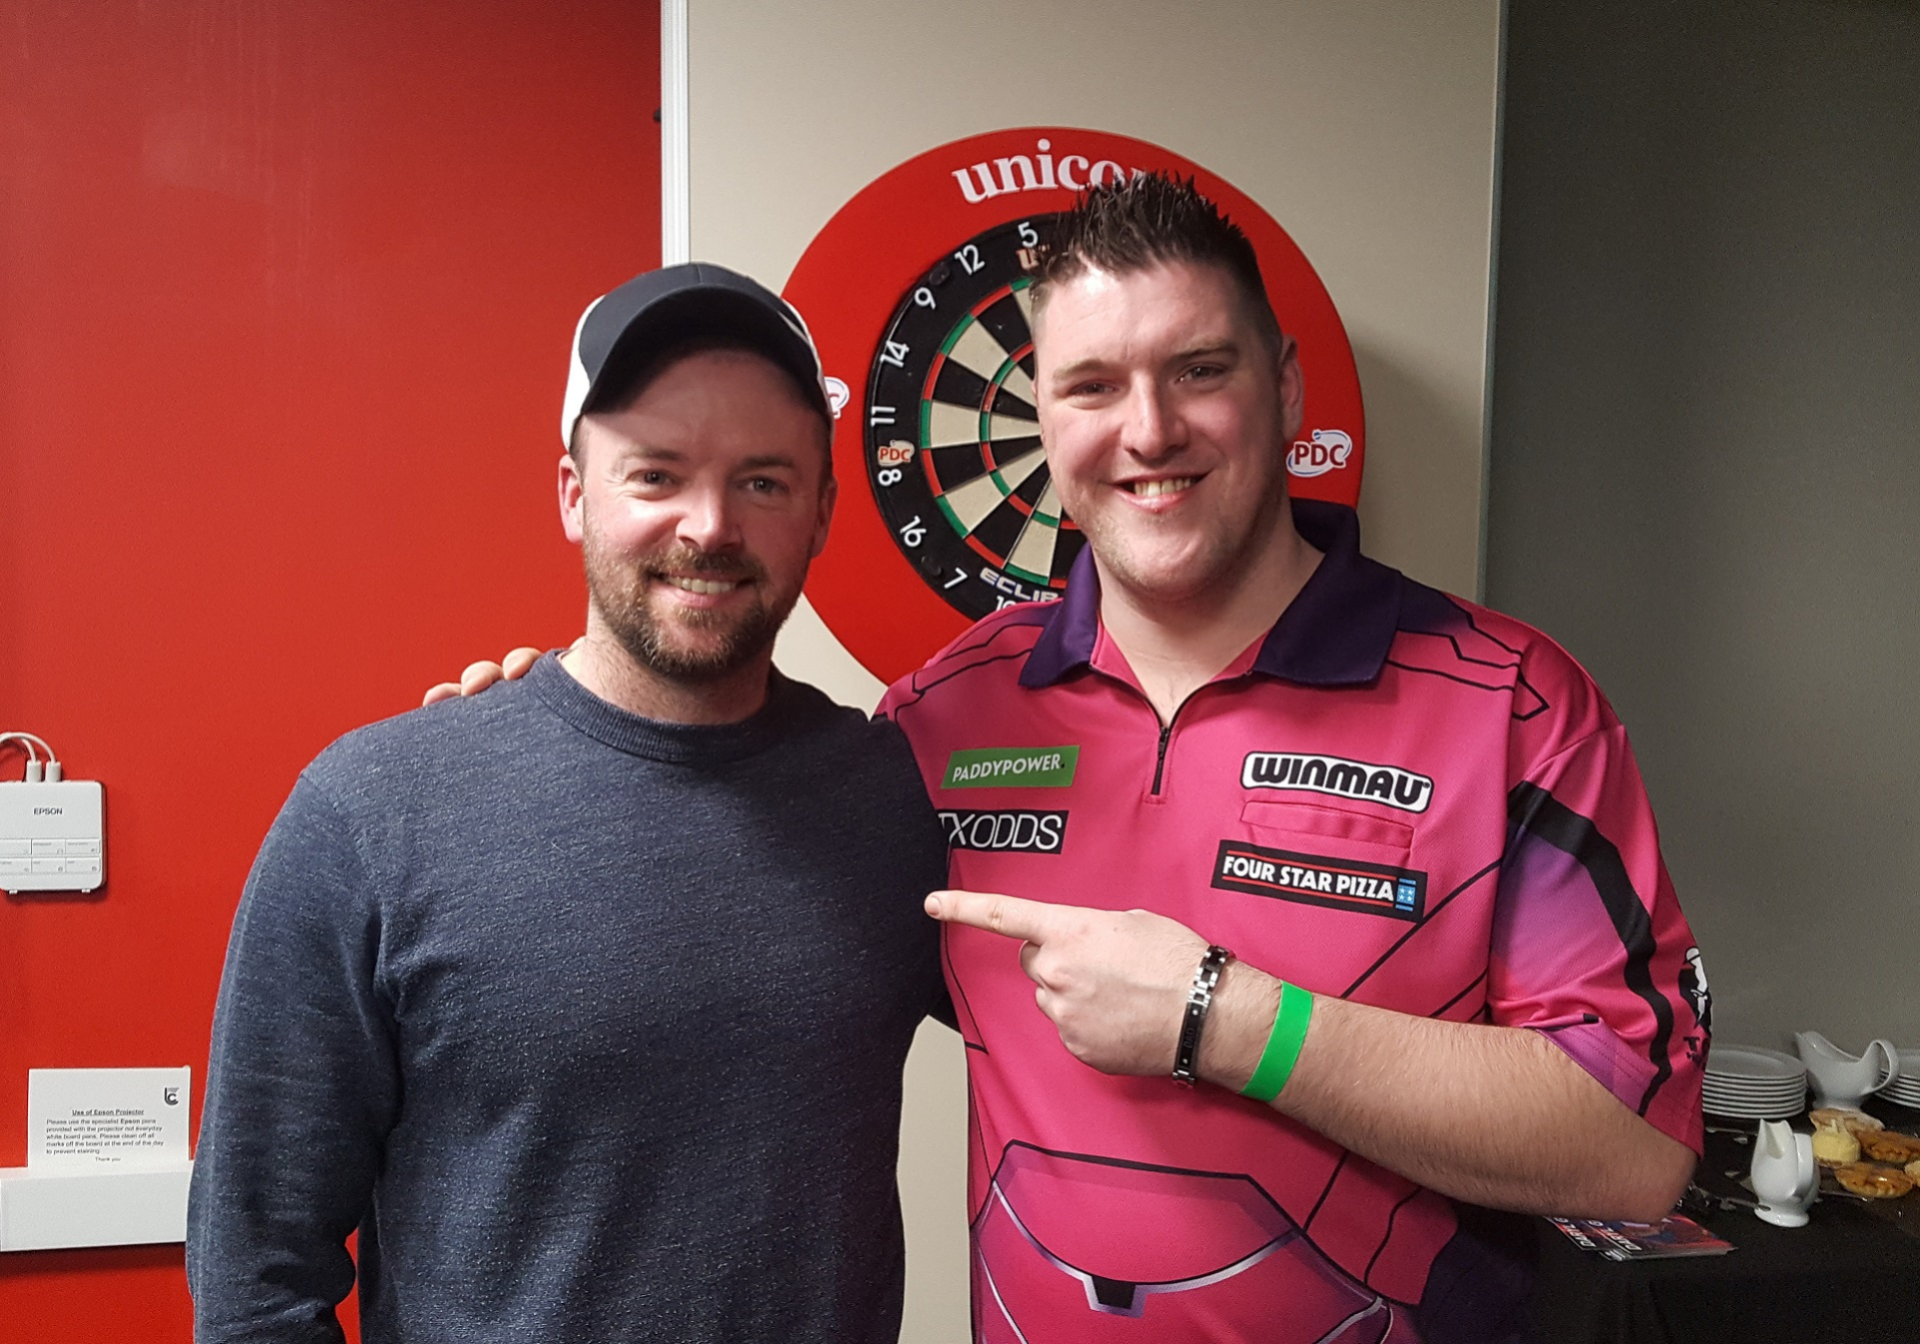 Daryl Gurney at Leicester Riders (PDC)